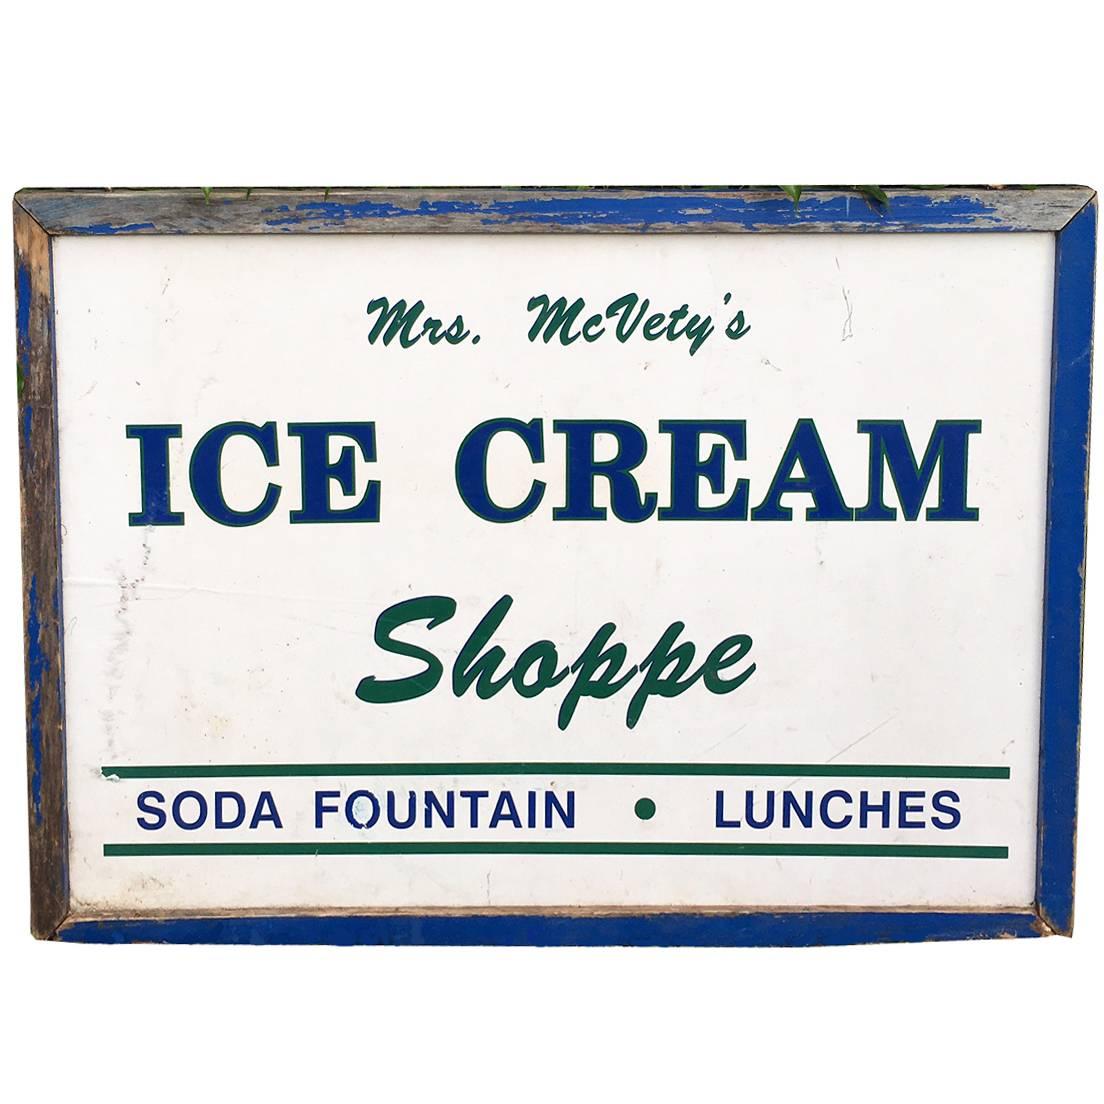 Hand-painted Ice Cream Shoppe Sign from Maine, Double-sided